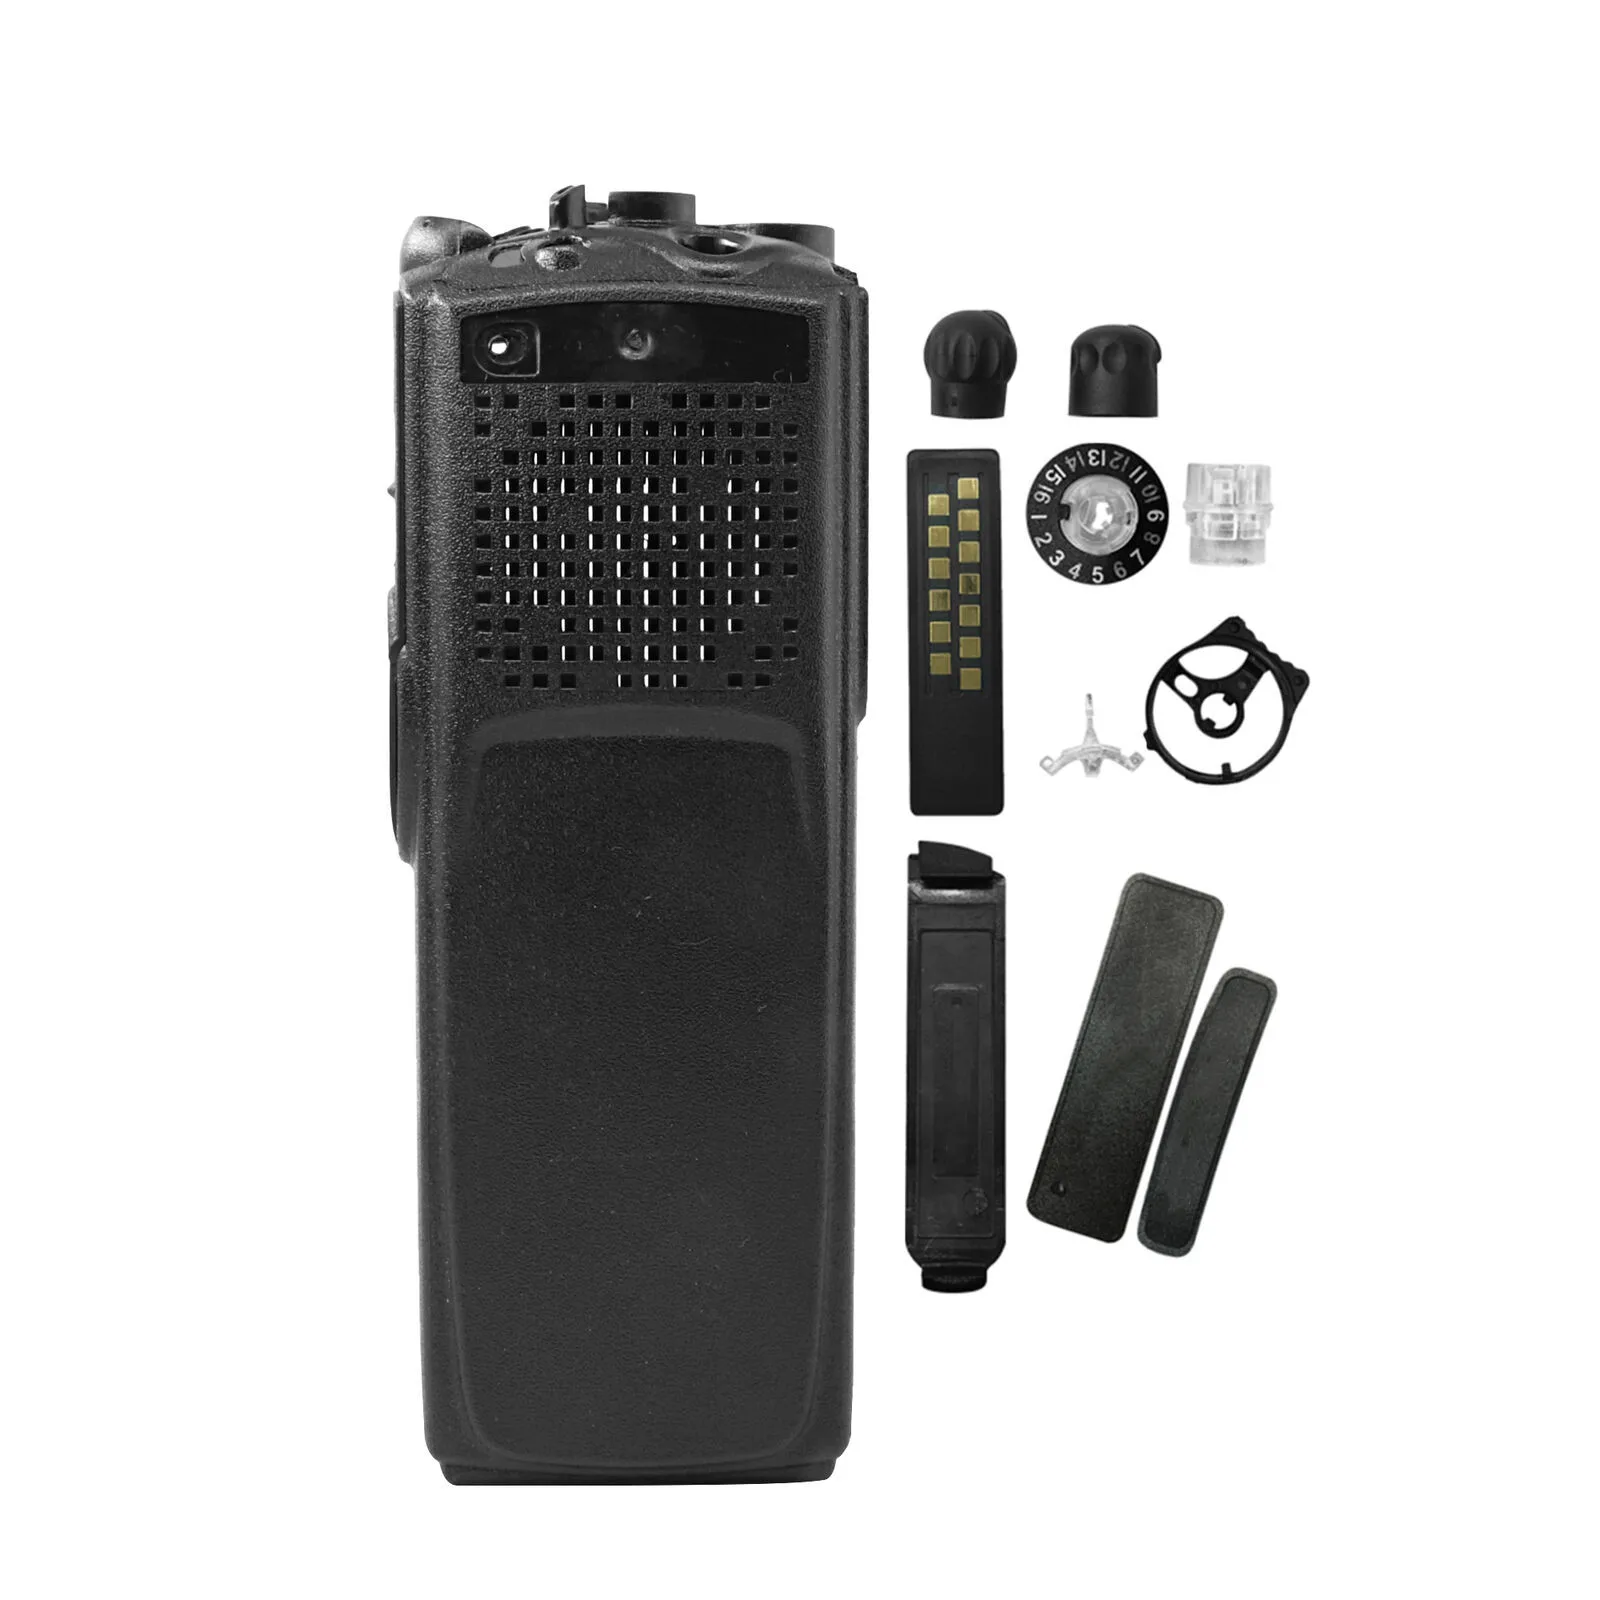 Black Walkie Talkie Replacement Front Housing Cover Case Kit For XTS5000 M1 Portable Two Way Radio